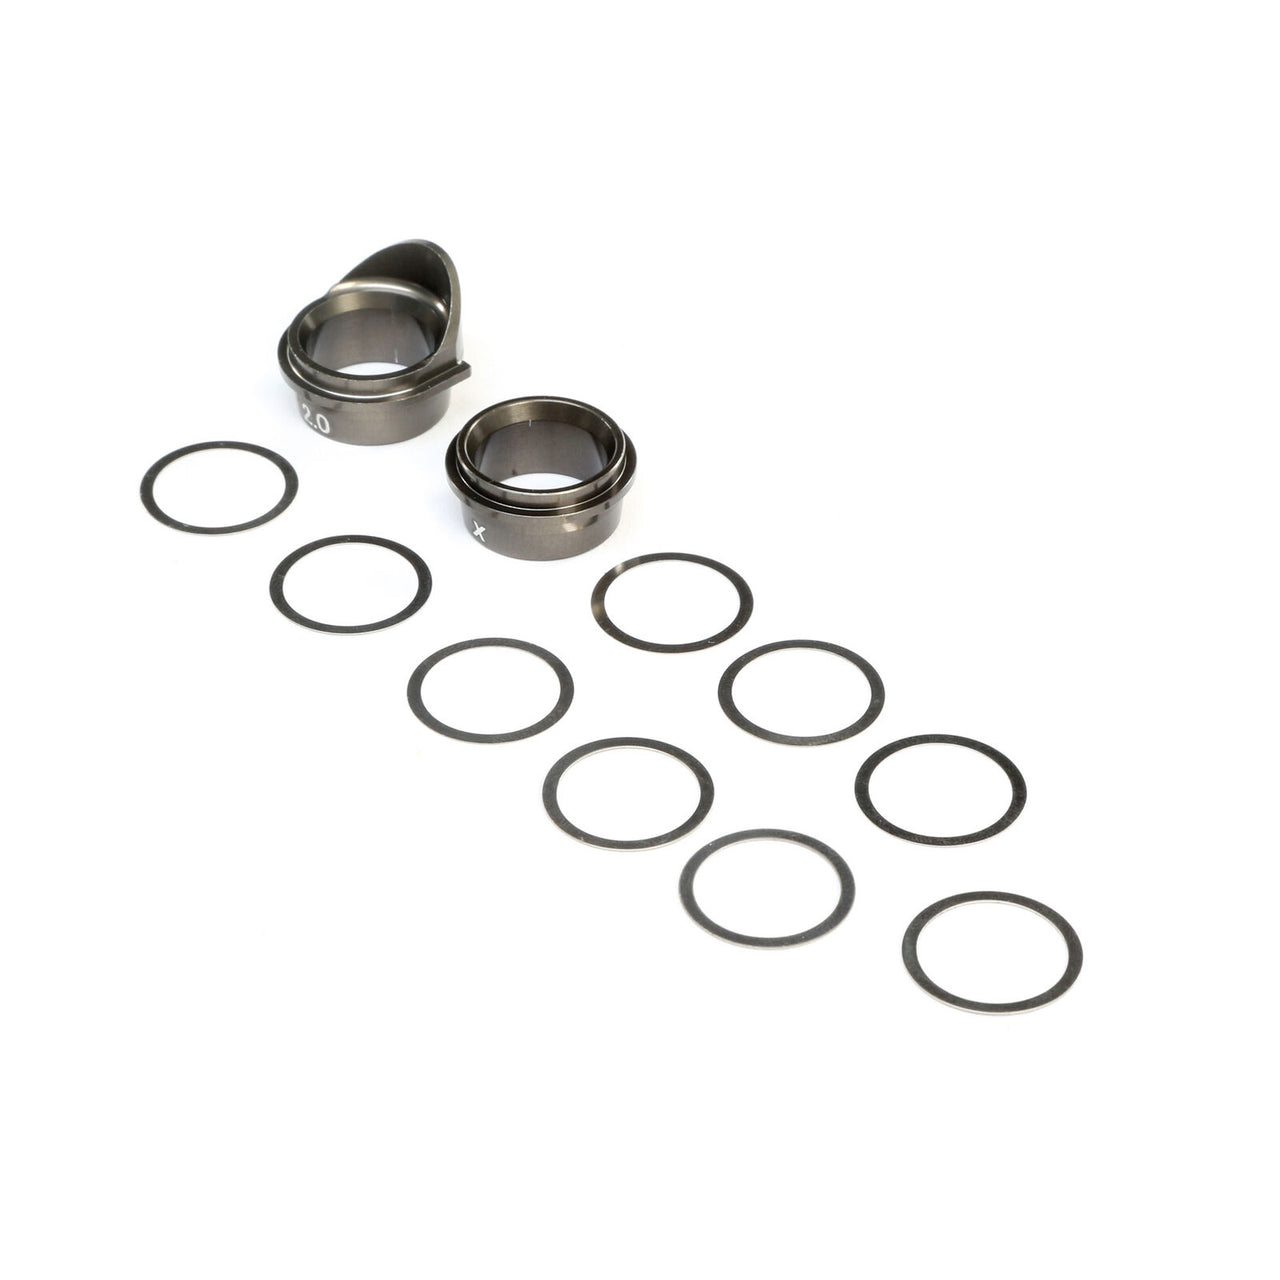 TLR242026 Rear Gearbox Bearing Inserts, Aluminum: 8X